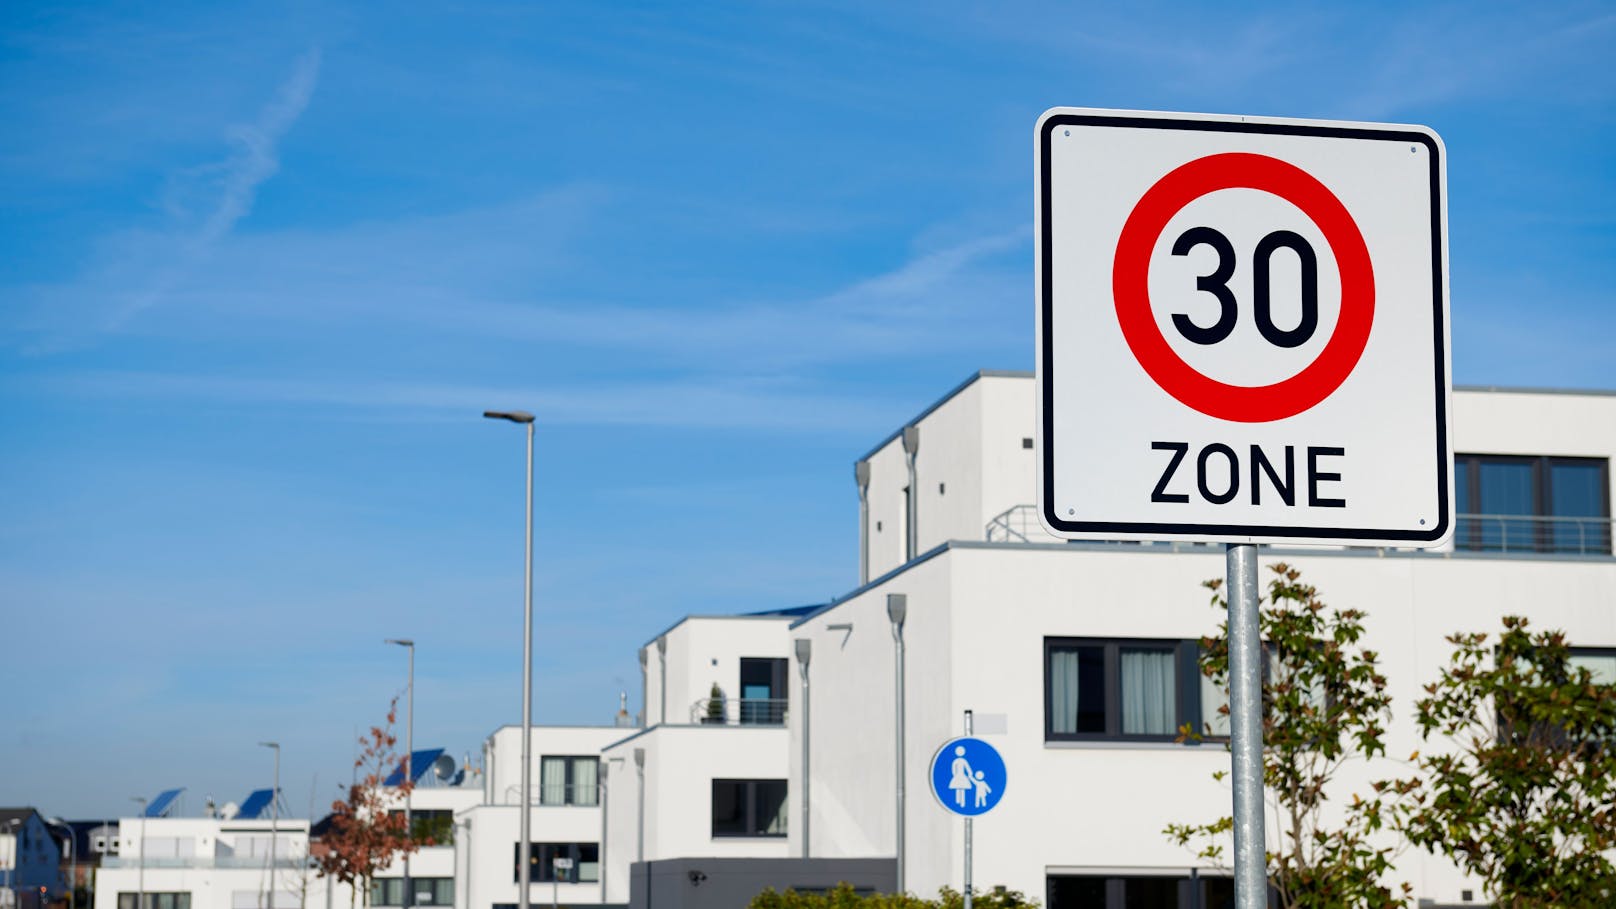 30km/h speed limit road sign in front of modern white family houses in a row. (germany)